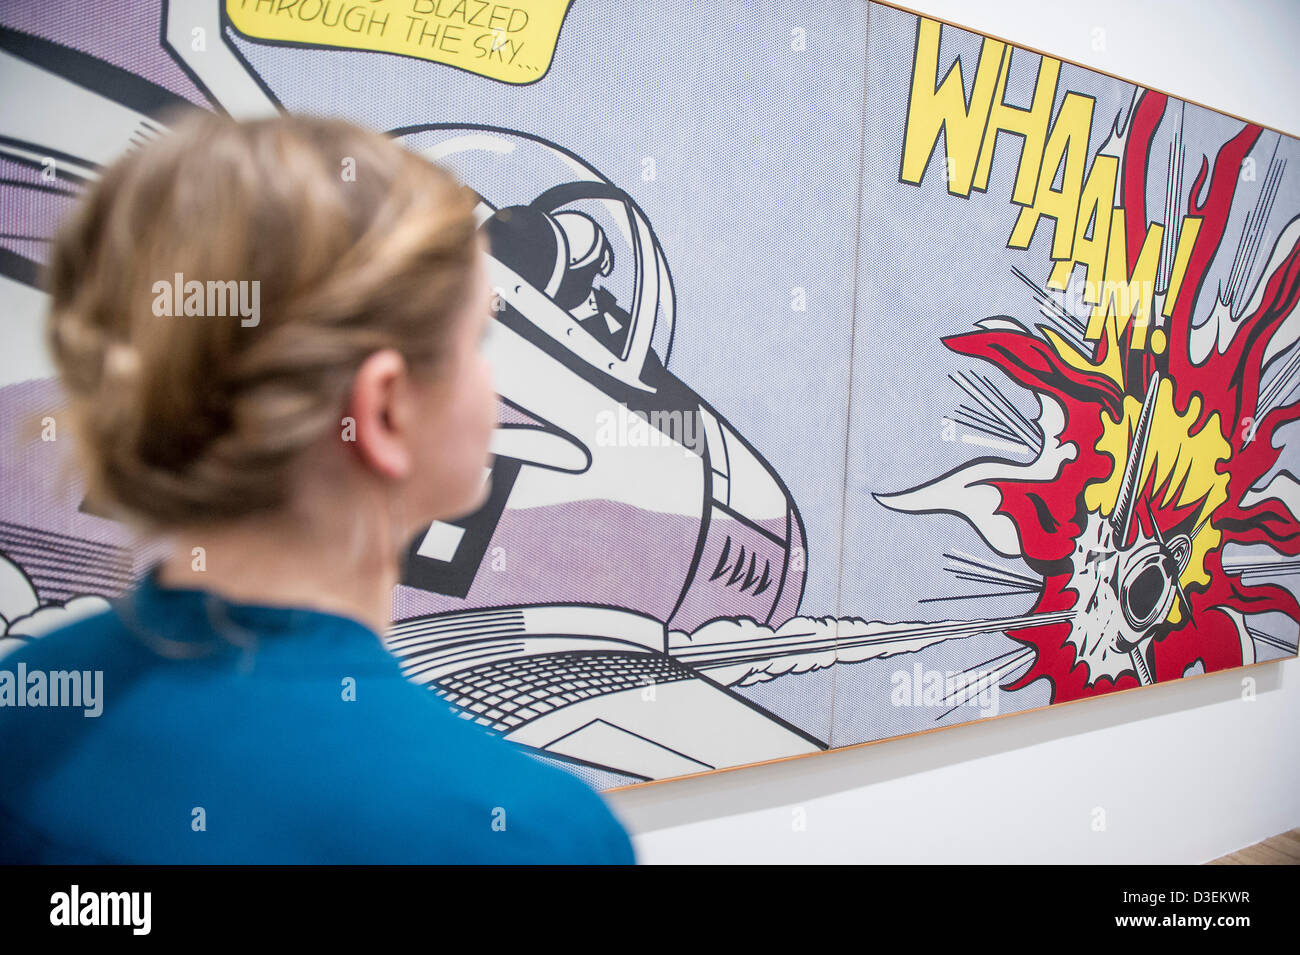 Tate Modern, London, UK. 18 February 2013. Whaam, inspired by a comic book. Roy Lichtenstein, one of the most famous figures in Pop Art, is exhibited at the Tate Modern. This is the first major retrospective of Lichtenstein’s work in twenty years and brings together over 100 of the artist's most iconic paintings. The show will run from 21 February to 27 May 2013 and is sponsored by Bank of America, Merrill Lynch. Tate Modern, London, UK 18 February 2013. Credit: Buy Bell/Alamy Live News Stock Photo